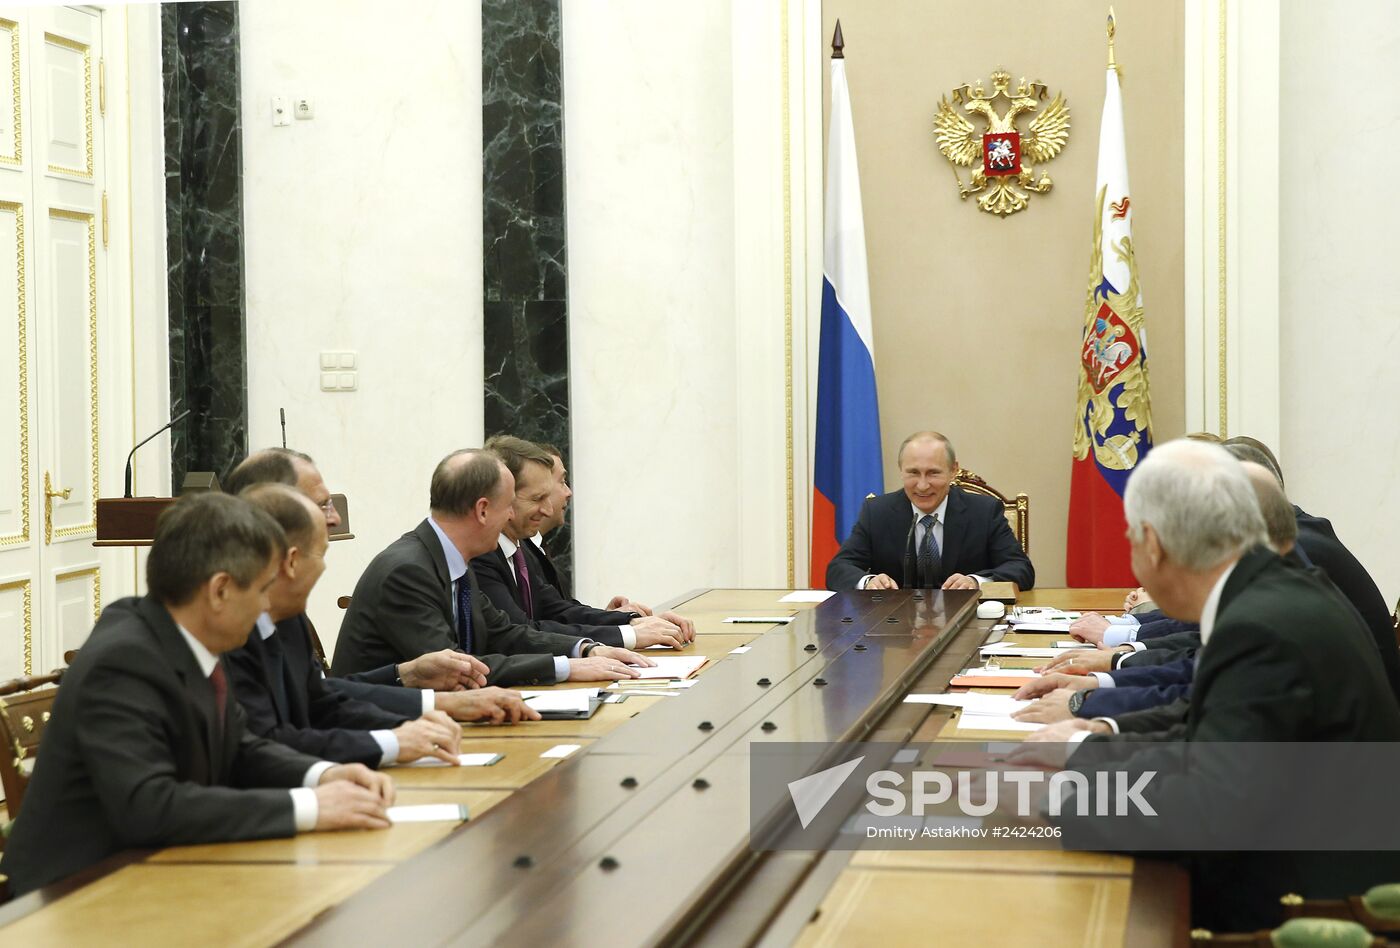 V.Putin holds meeting of Security Council of Russia